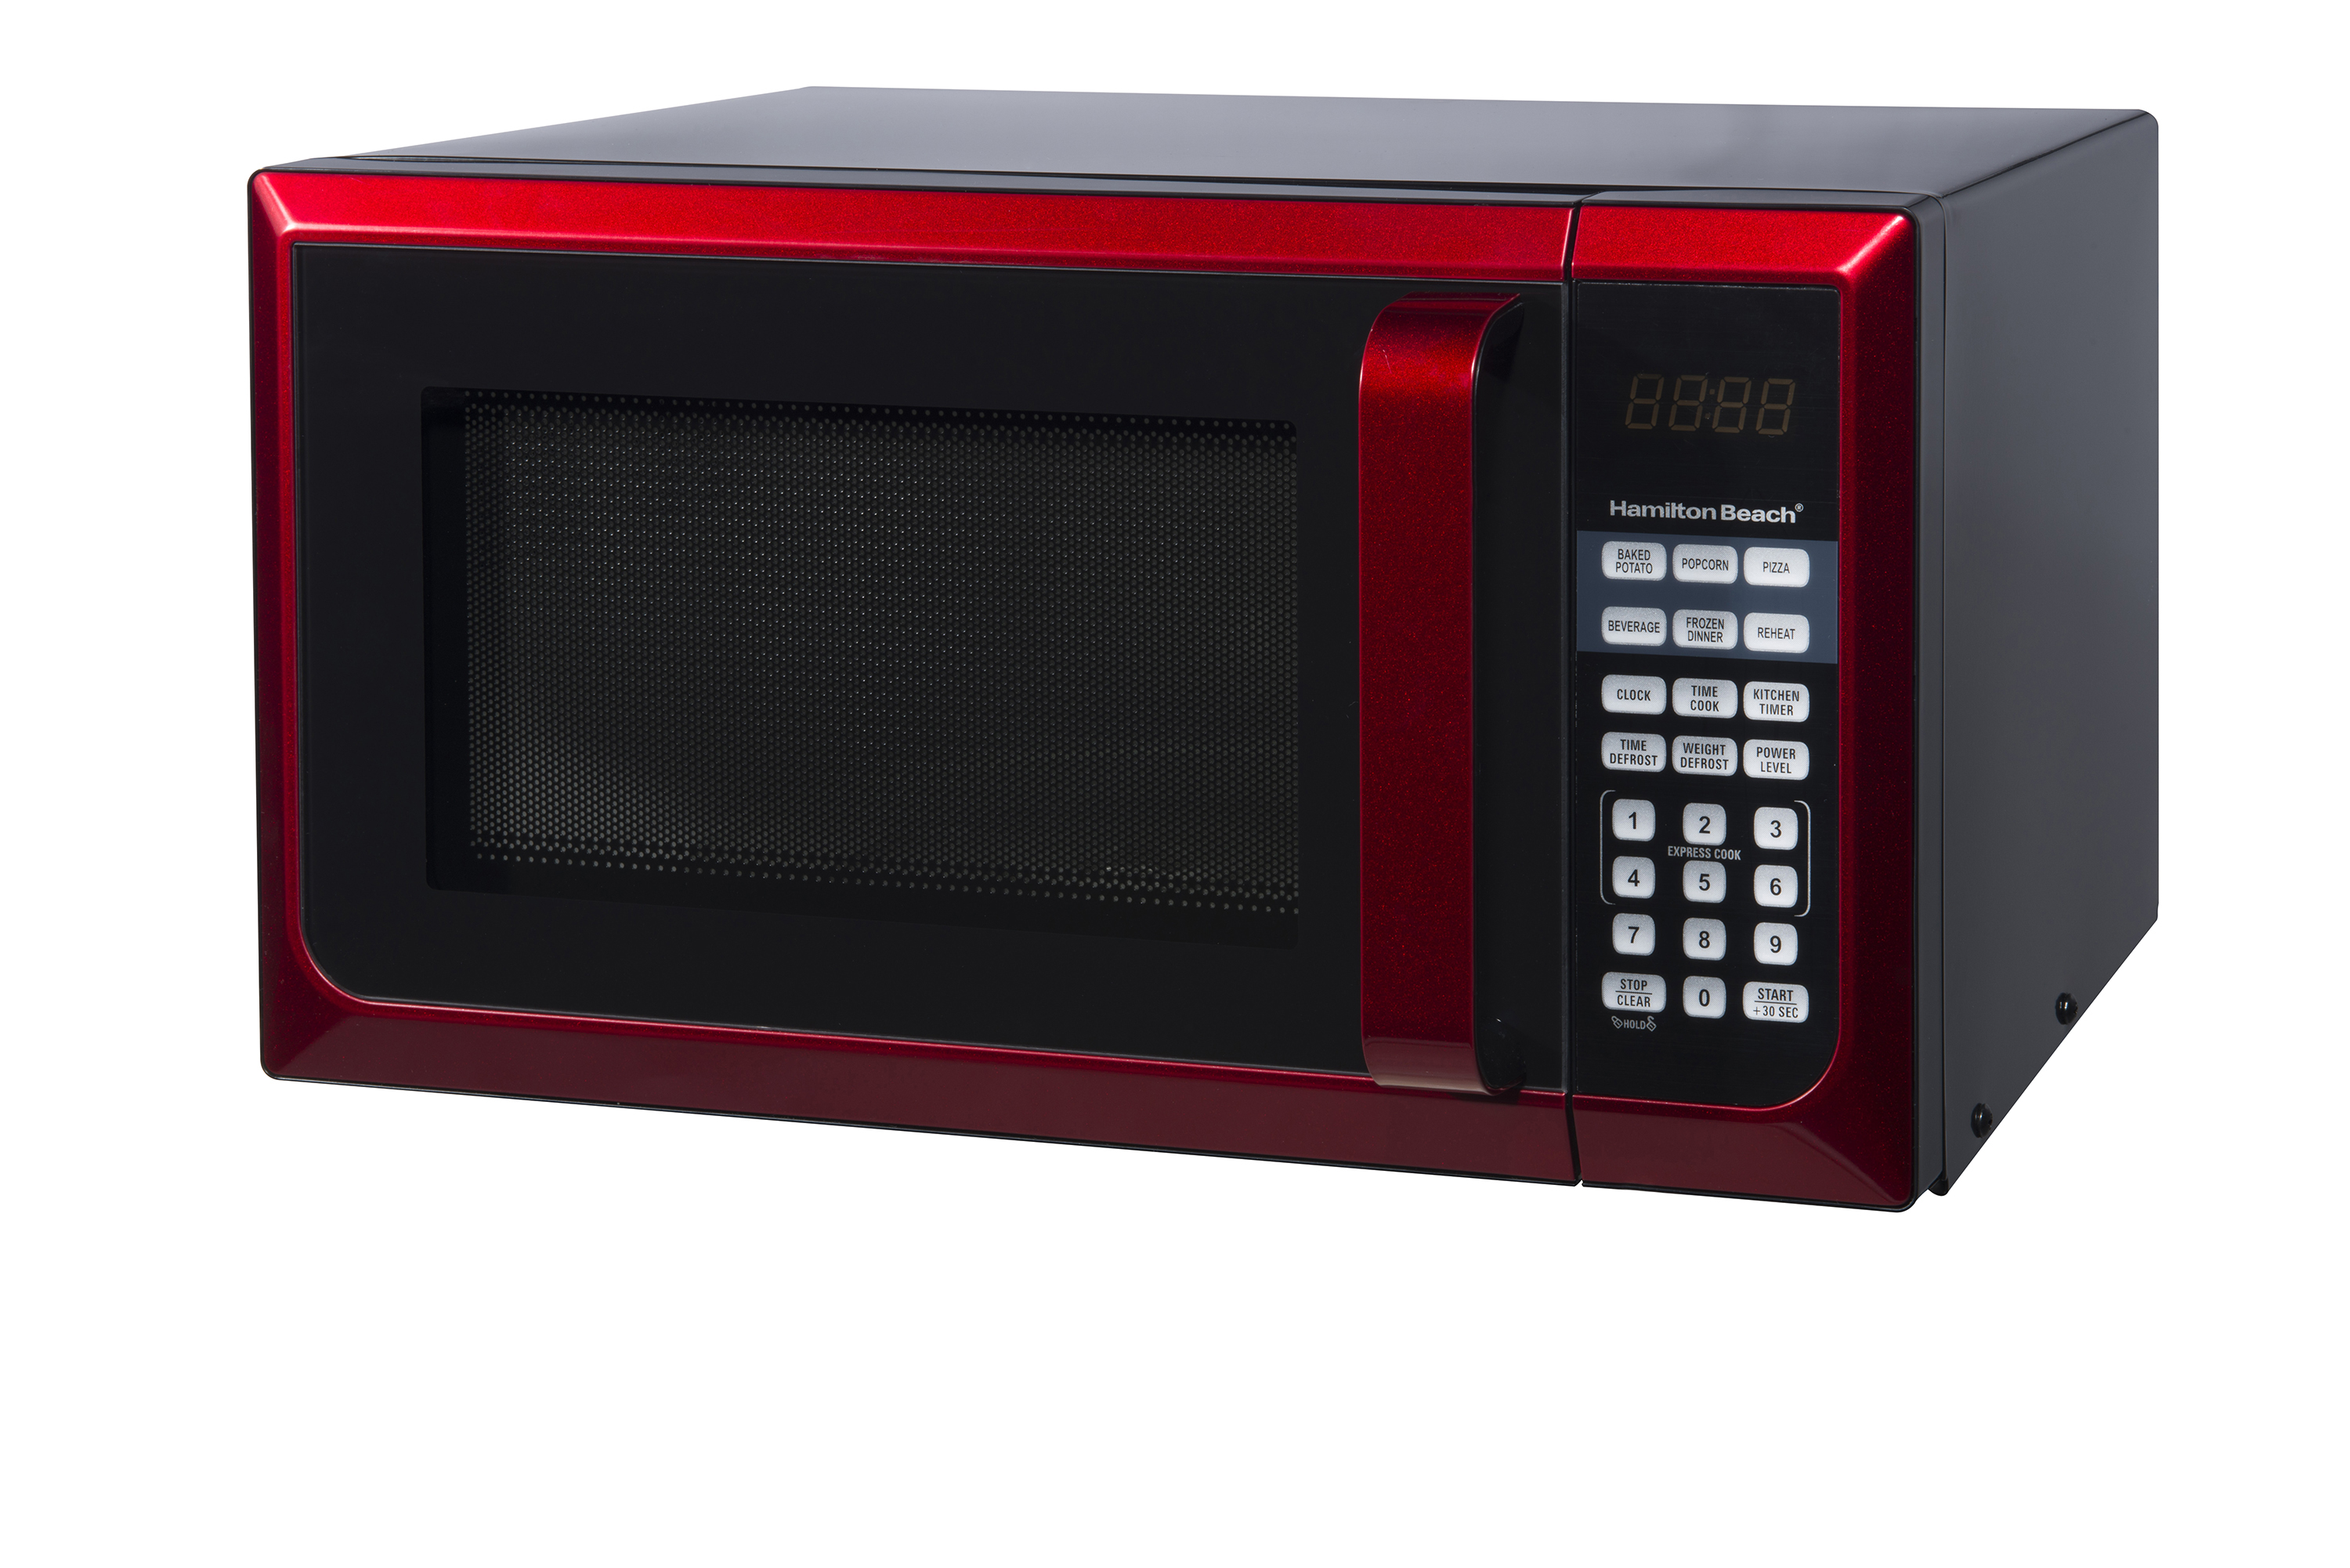 Hamilton Beach 0.9 cu. ft. Countertop Microwave Oven, 900 Watts, Red Stainless Steel - image 3 of 7